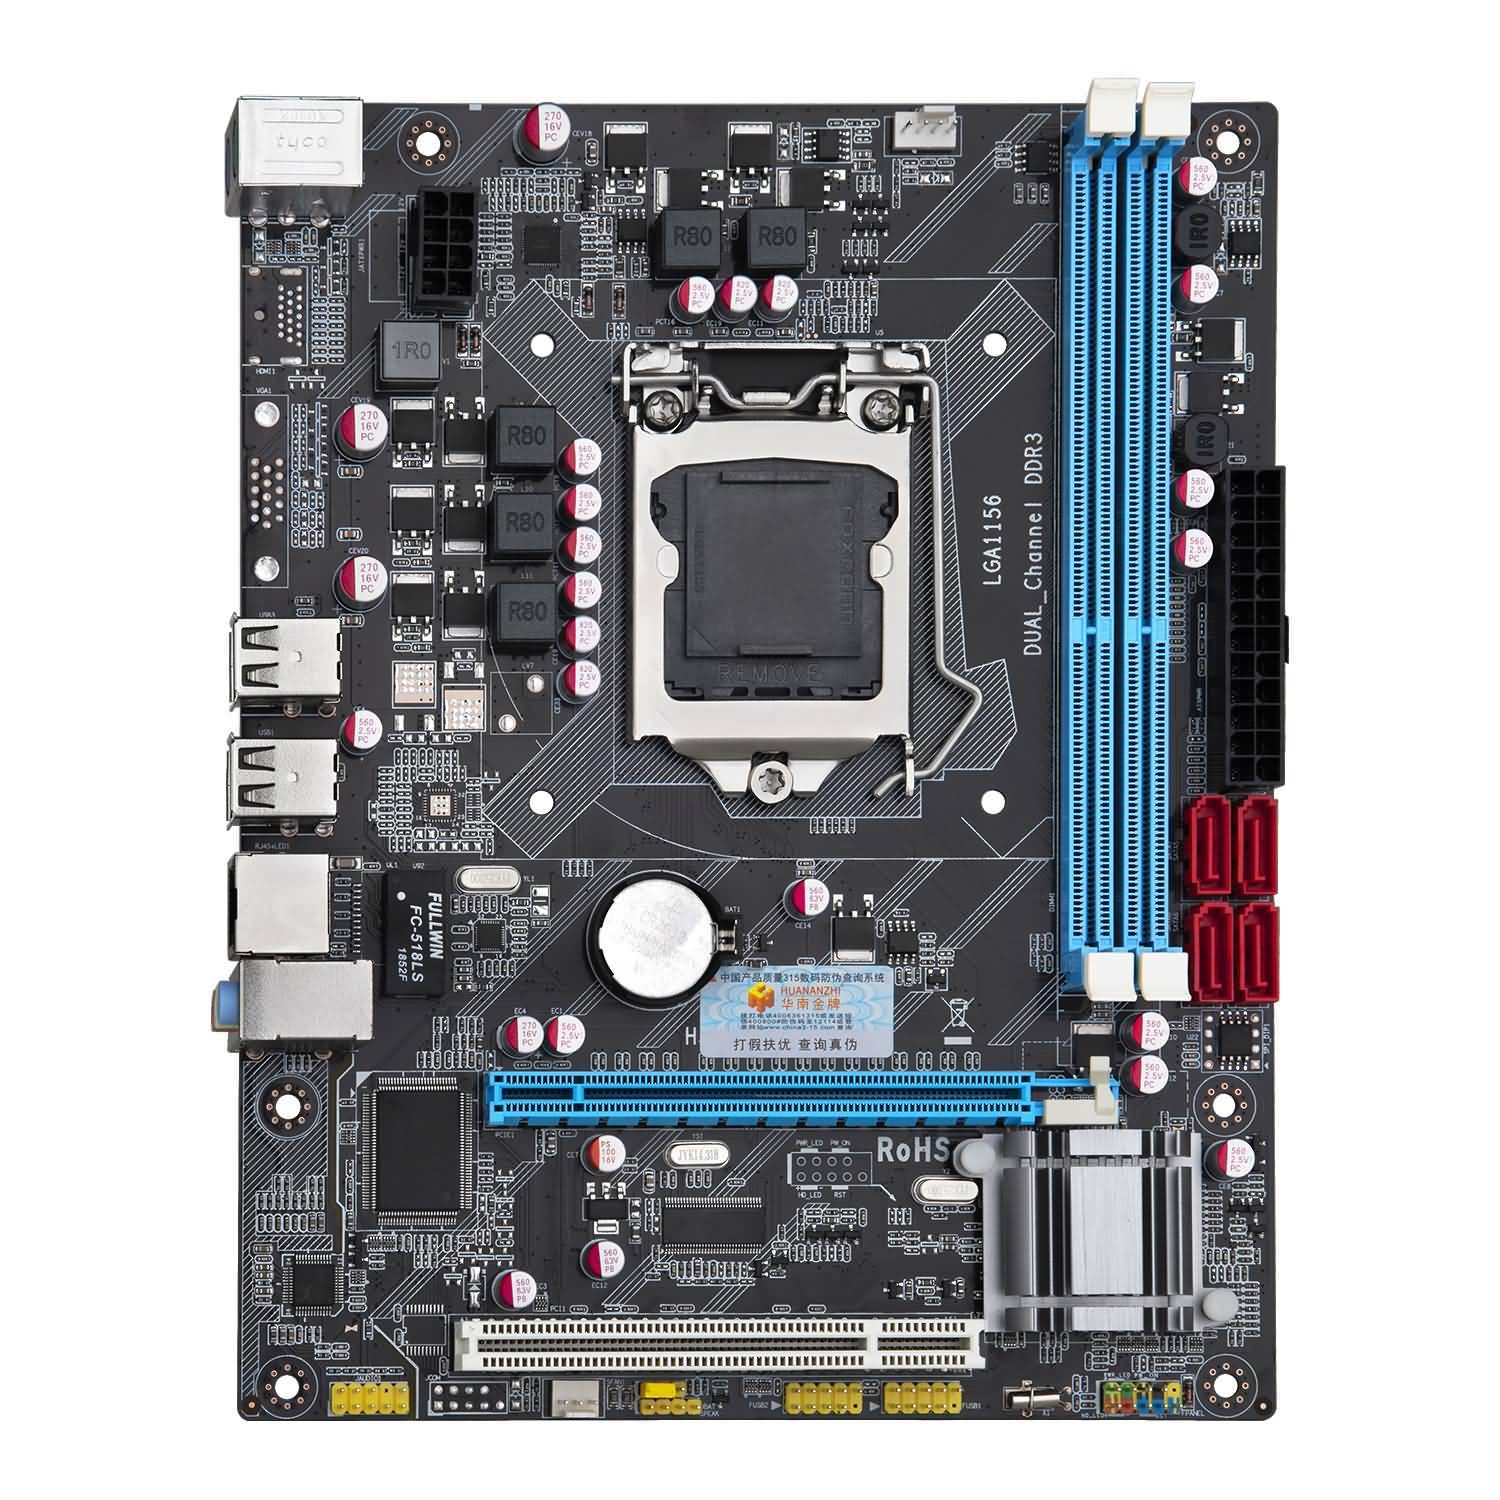 Download Huananzhi P55 Motherboard Free